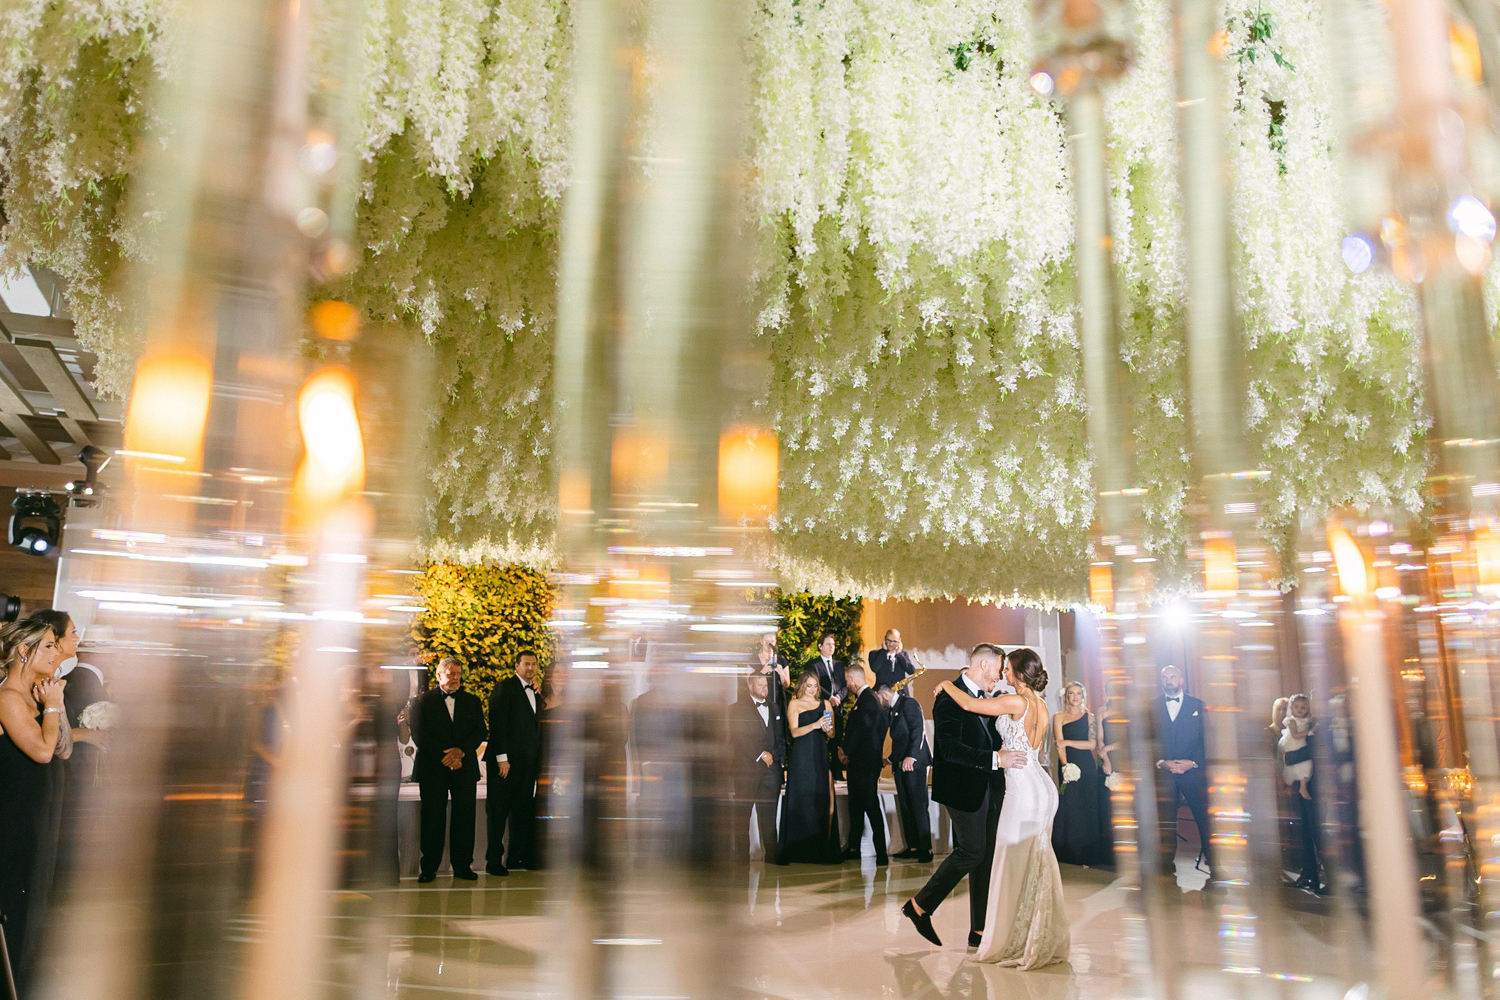 Bride and grooms first dance in the Terra Ballroom under a large white orchid ceiling installation over the dance floor